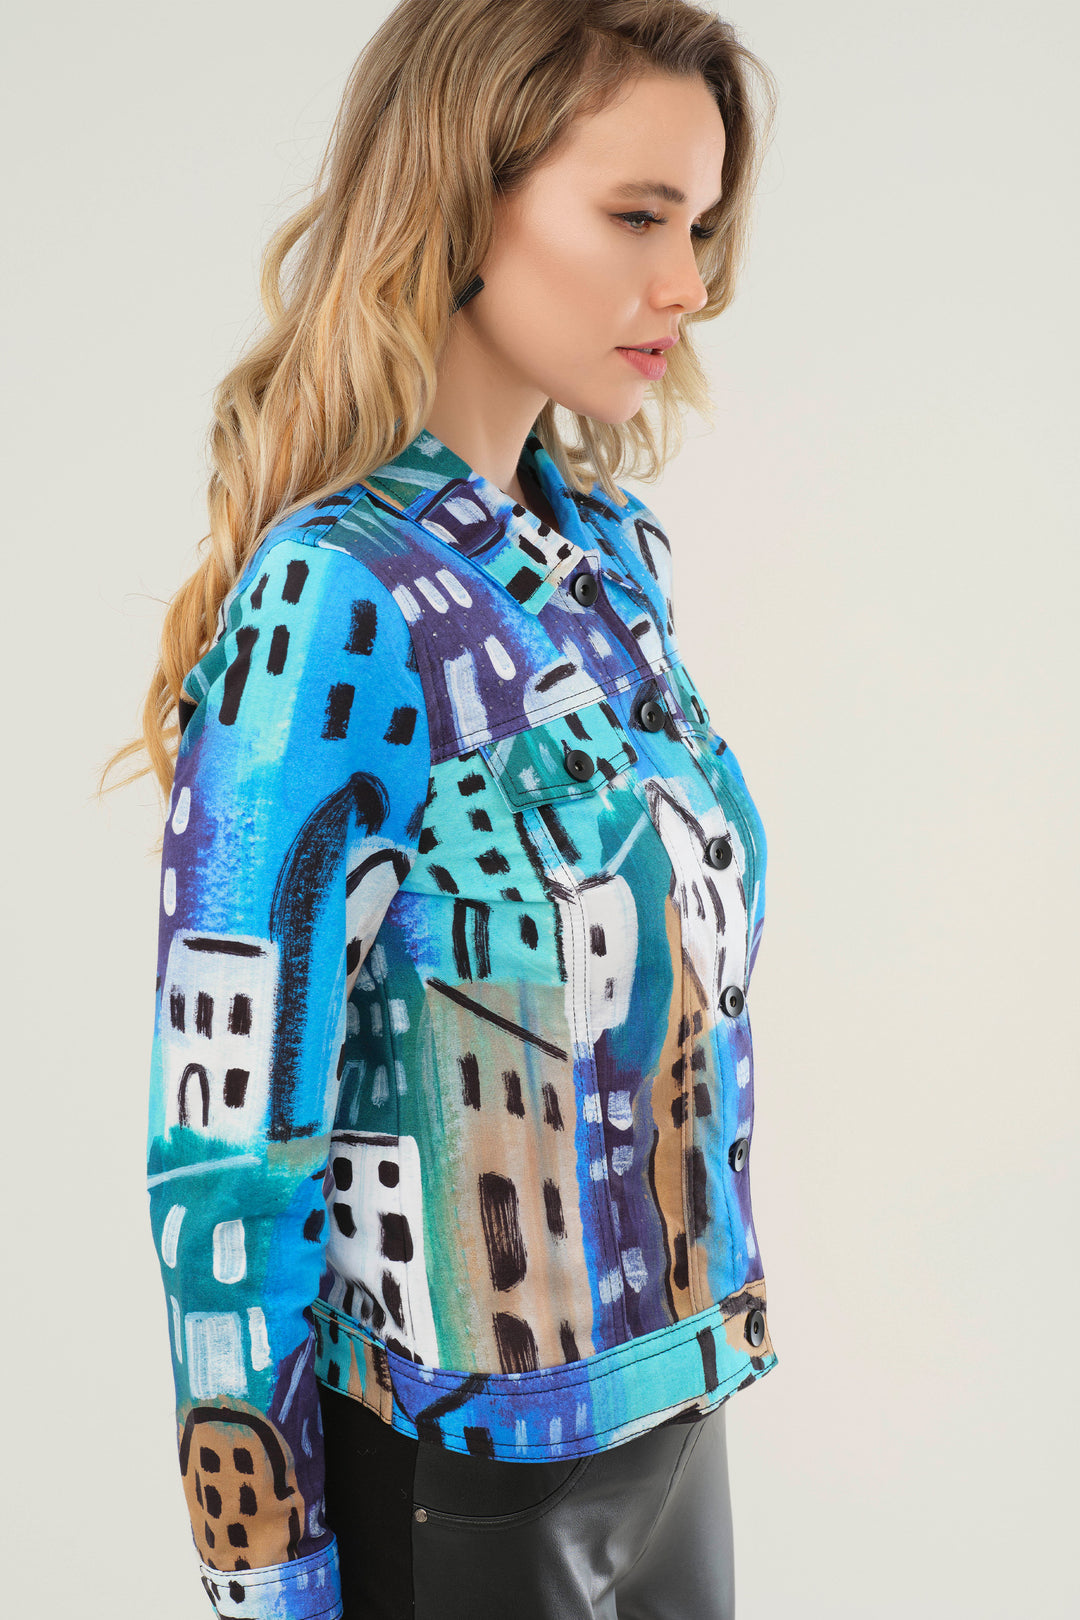 Featuring a wonderful print jean style, faux breast pockets, clear rhinestone detailing, a collar and front buttons and cuffs, this jacket oozes both sophistication and edge. 